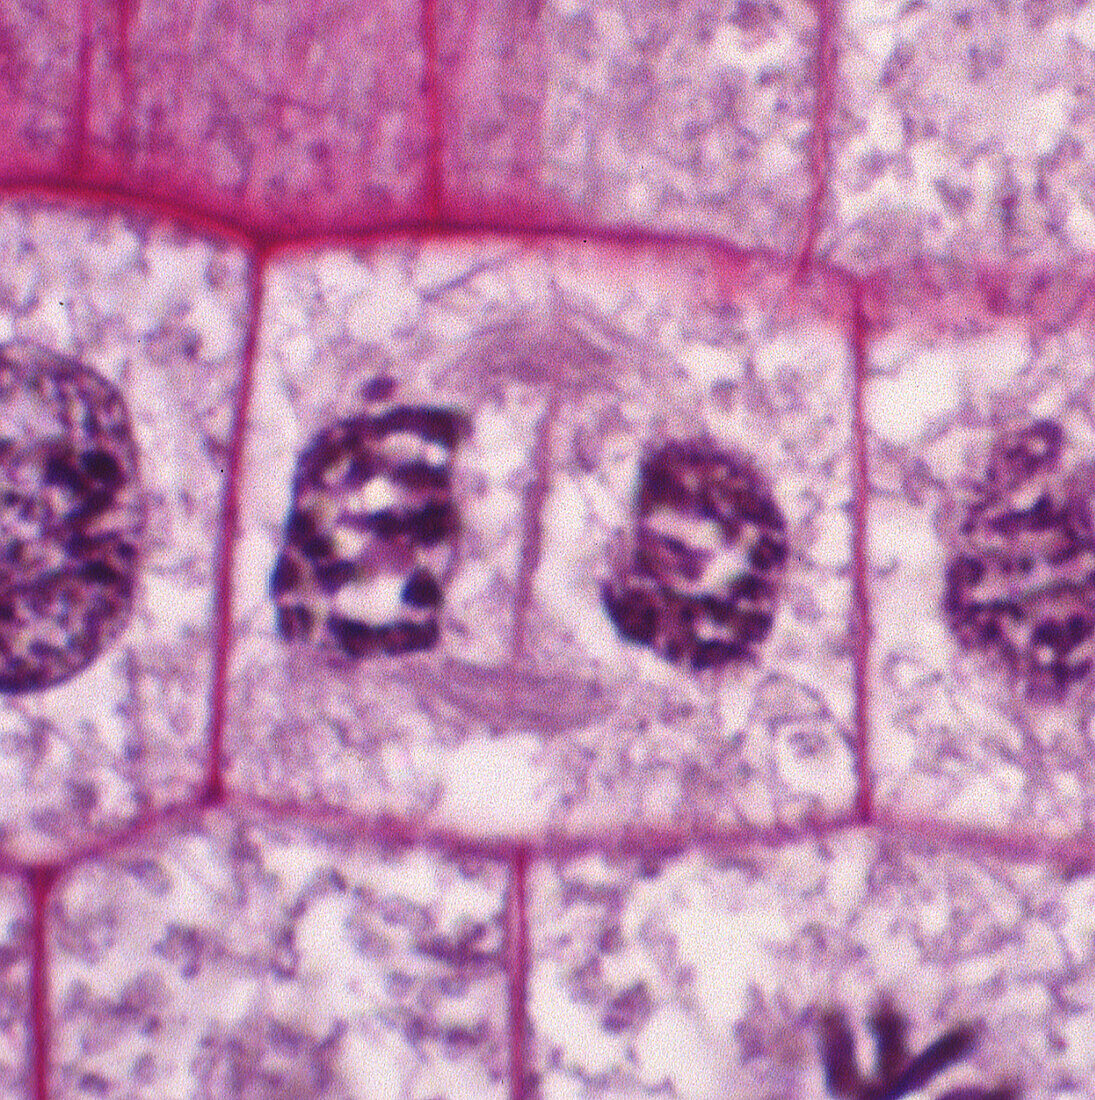 Cytokinesis in onion root tip cell, light micrograph